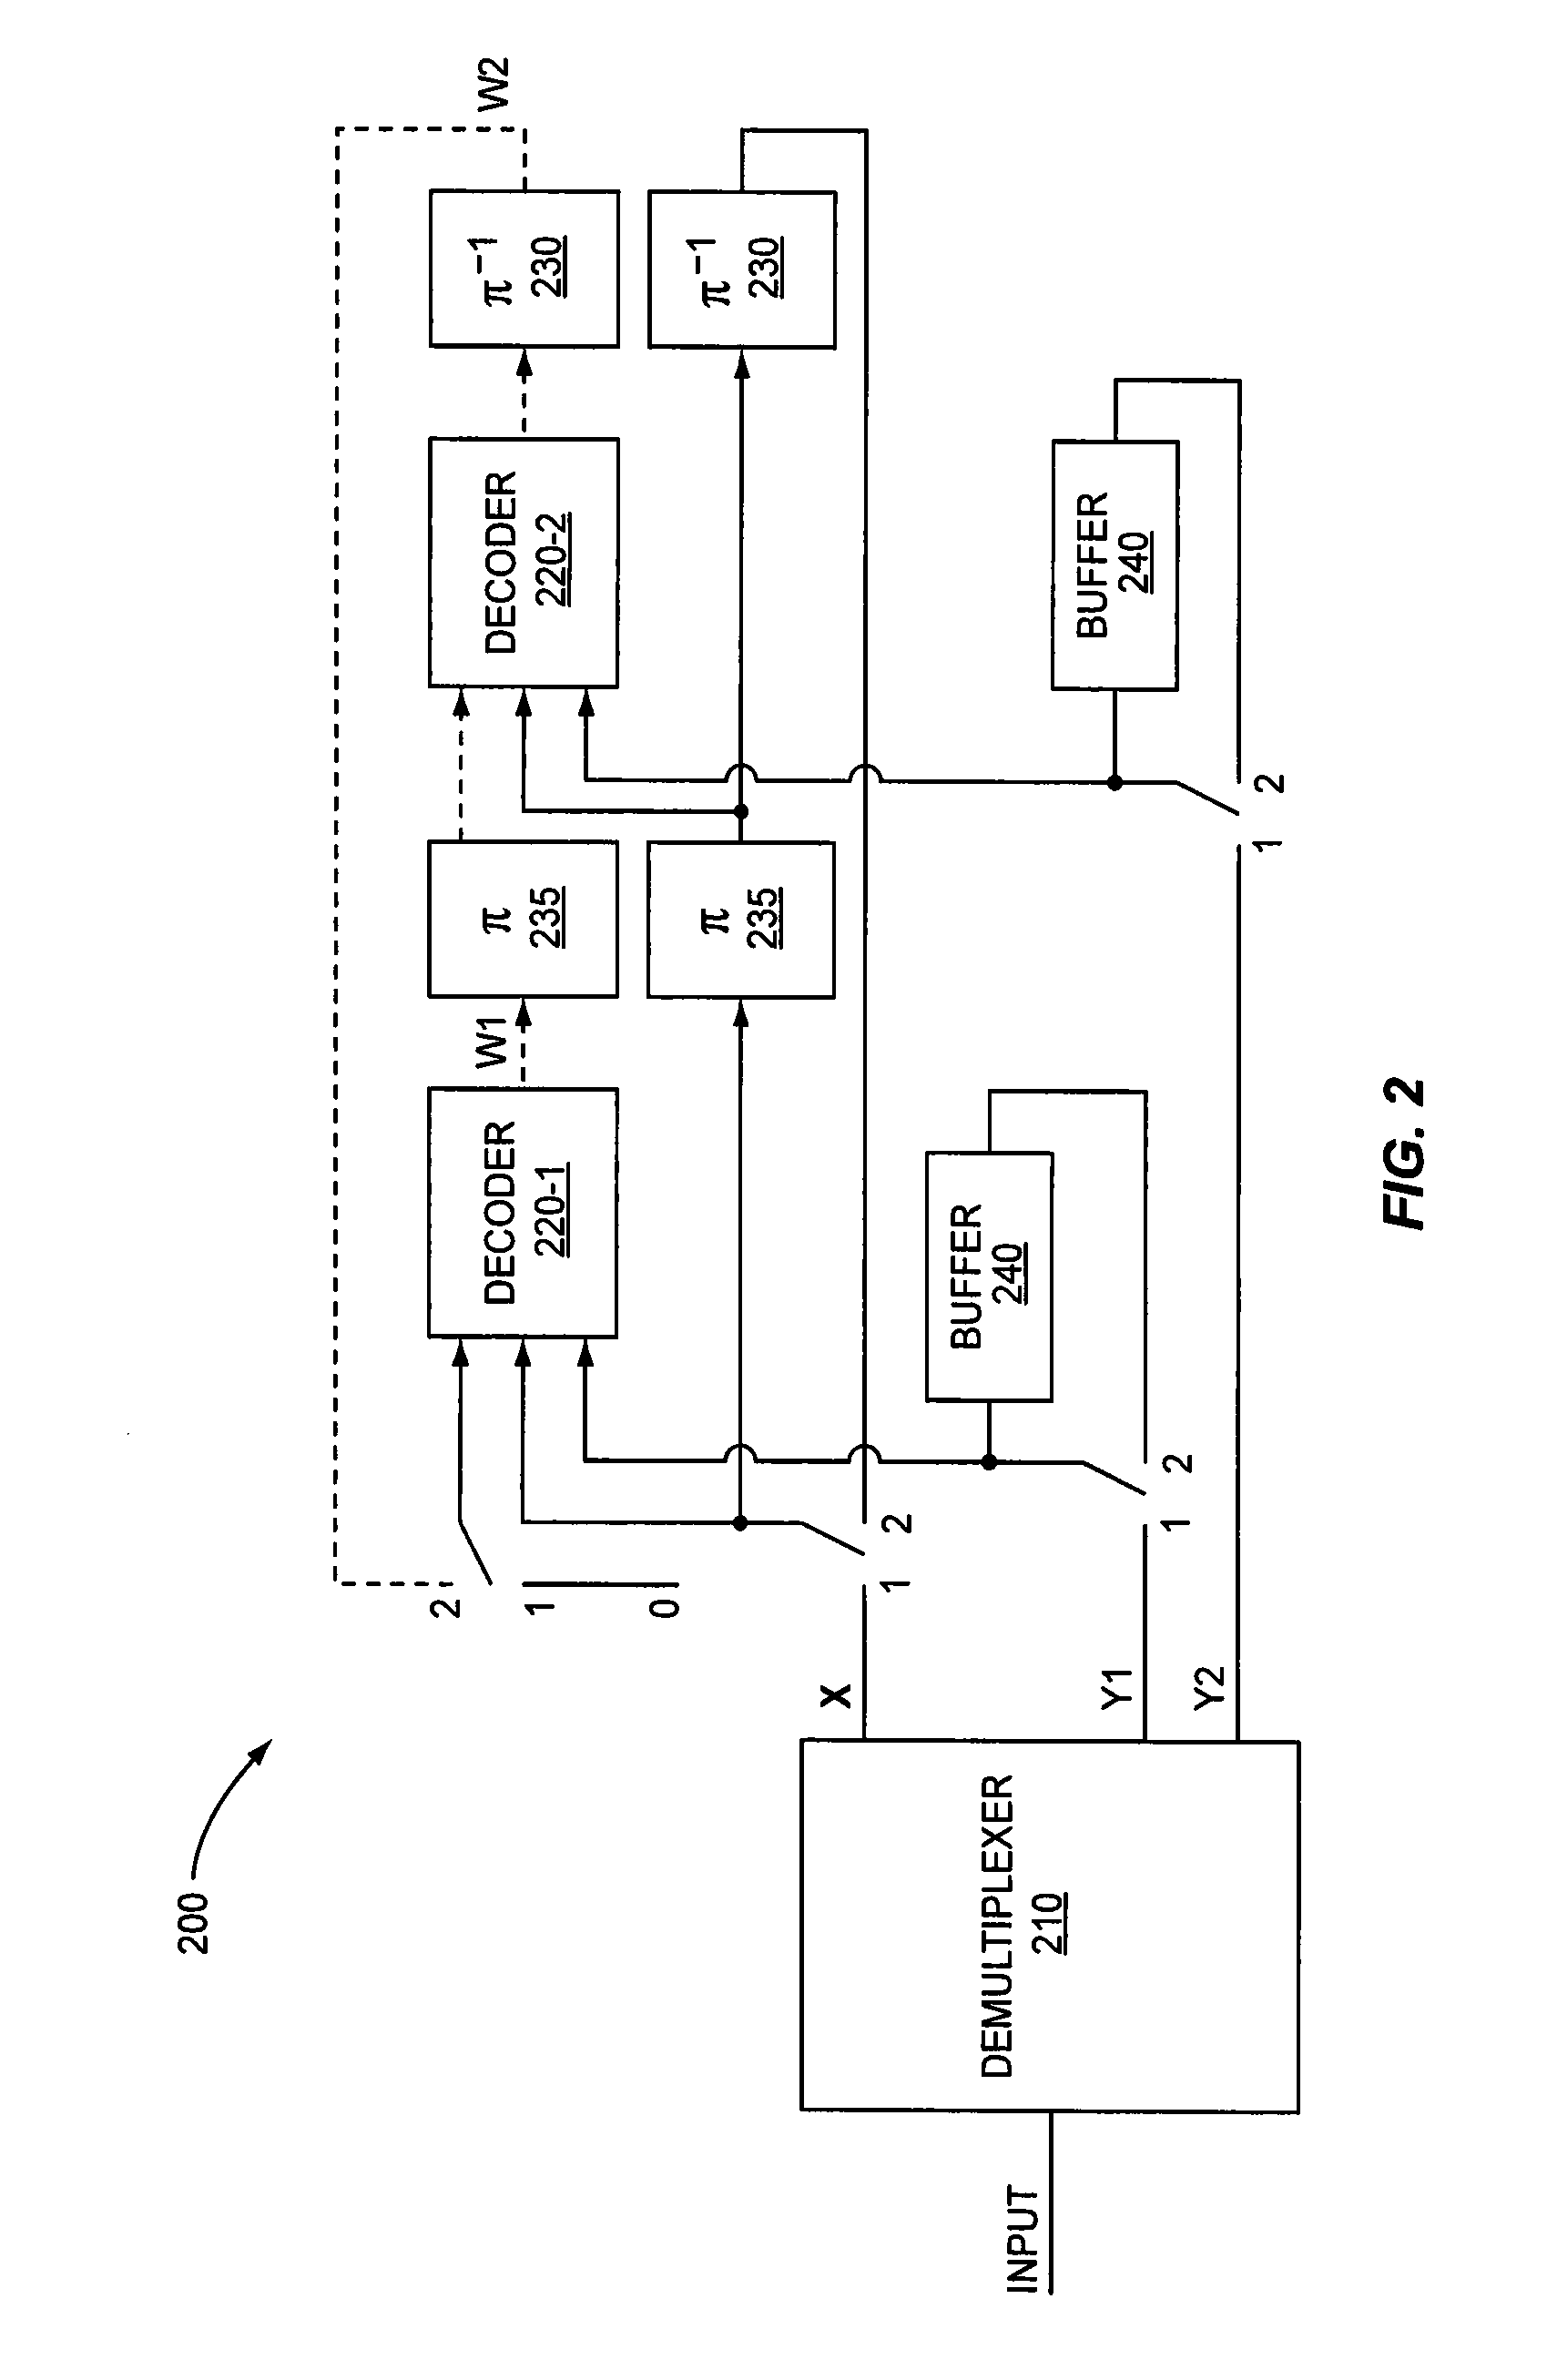 Efficient soft value generation for coded bits in a turbo decoder